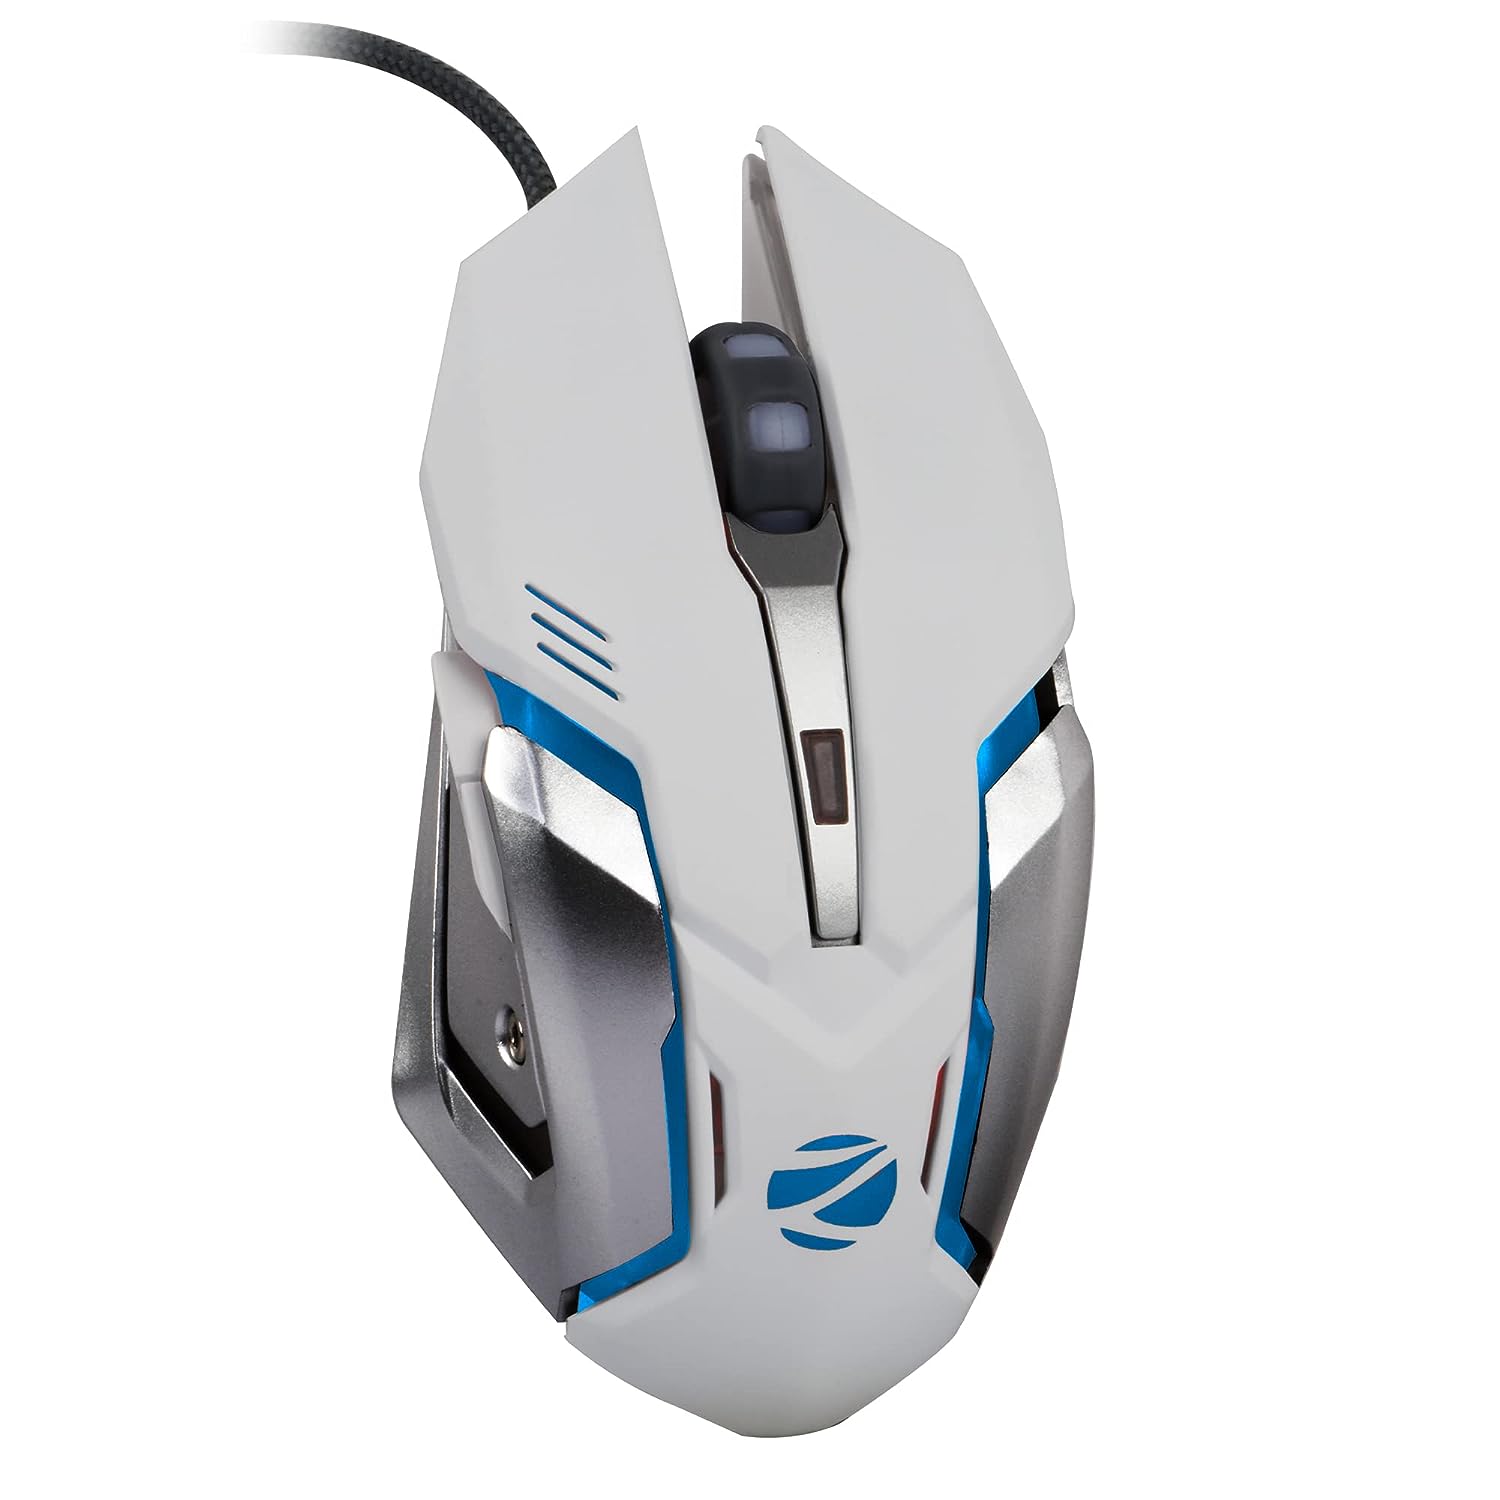 ZEB TRANSFORMER M (White) Wired Optical Gaming Mouse